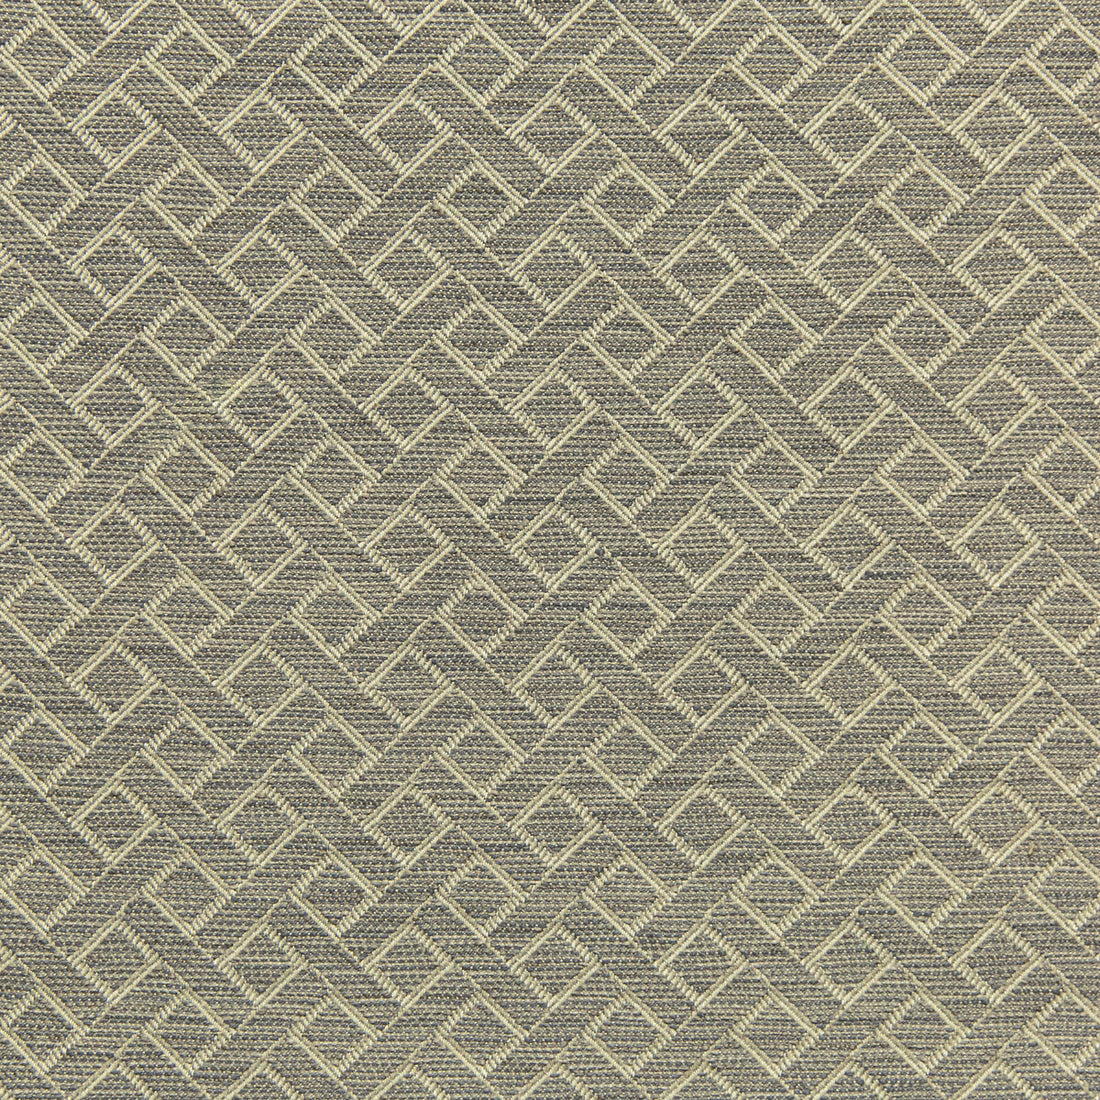 Maldon Weave fabric in pebble color - pattern 2020102.1121.0 - by Lee Jofa in the Linford Weaves collection